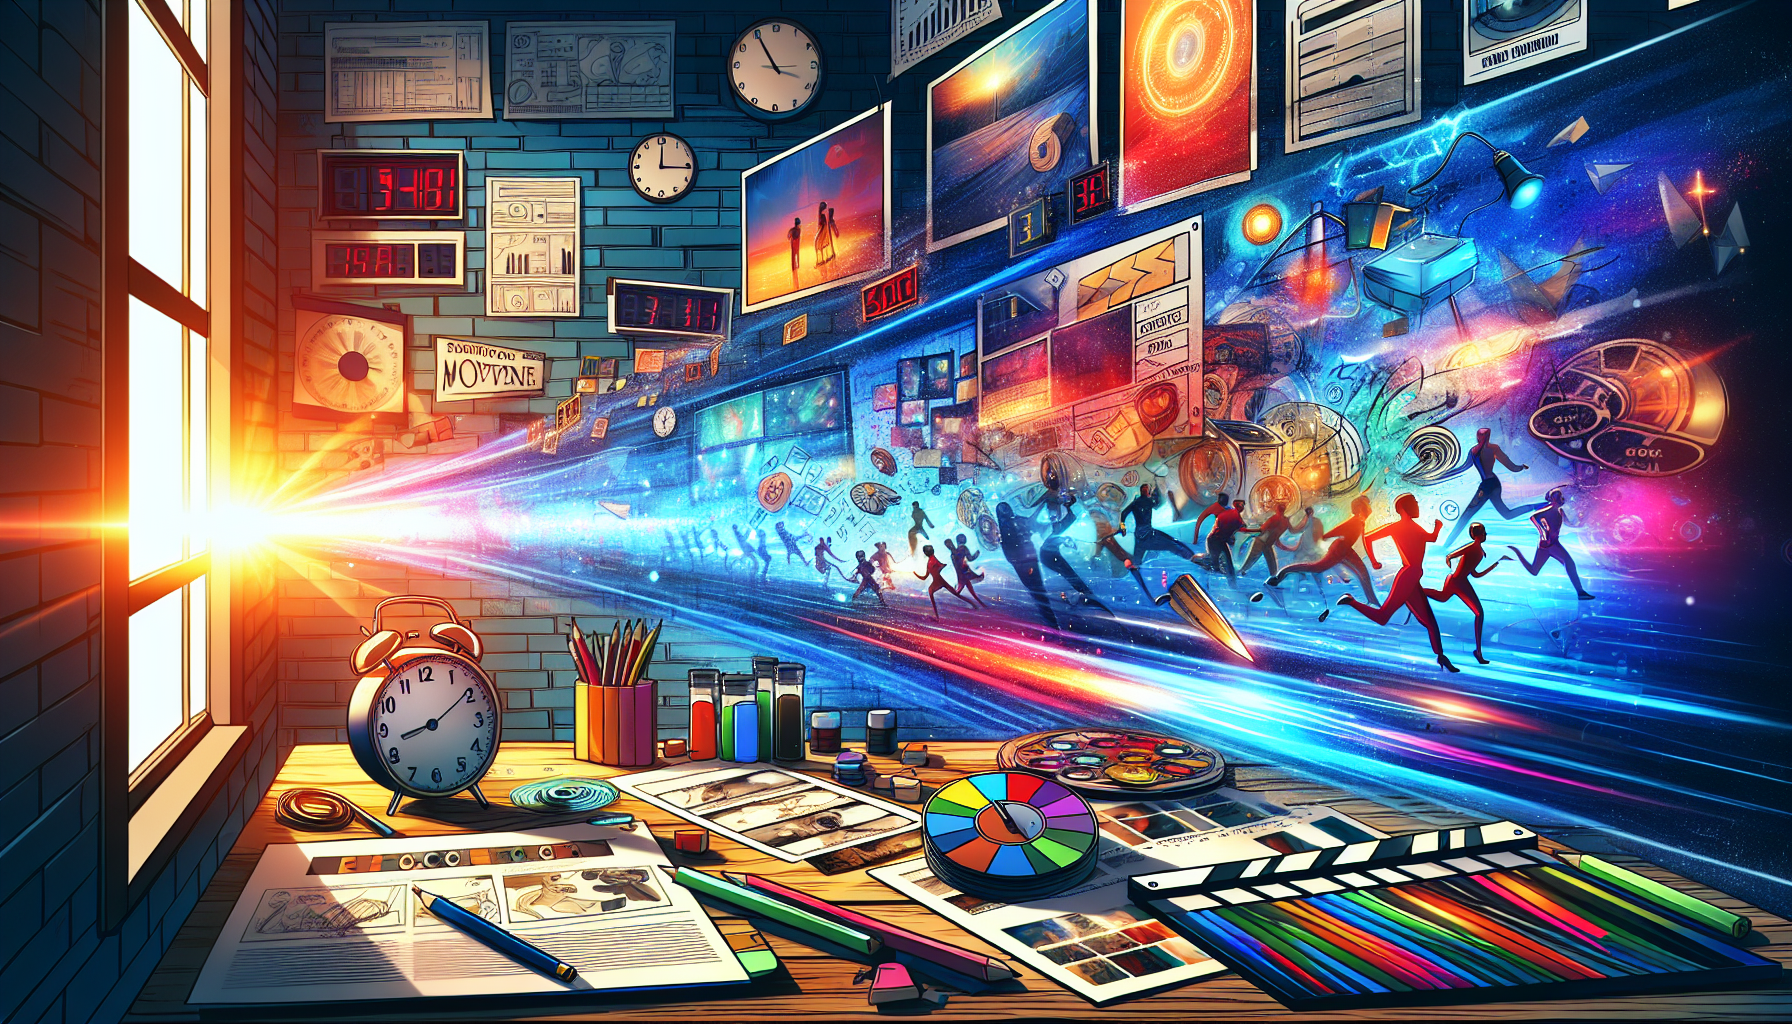 A dynamic montage depicting various scenes of an animated screenplay spread across a filmmaker's desk, with a glowing spotlight highlighting a section labeled 'Pacing Techniques'. The background shows